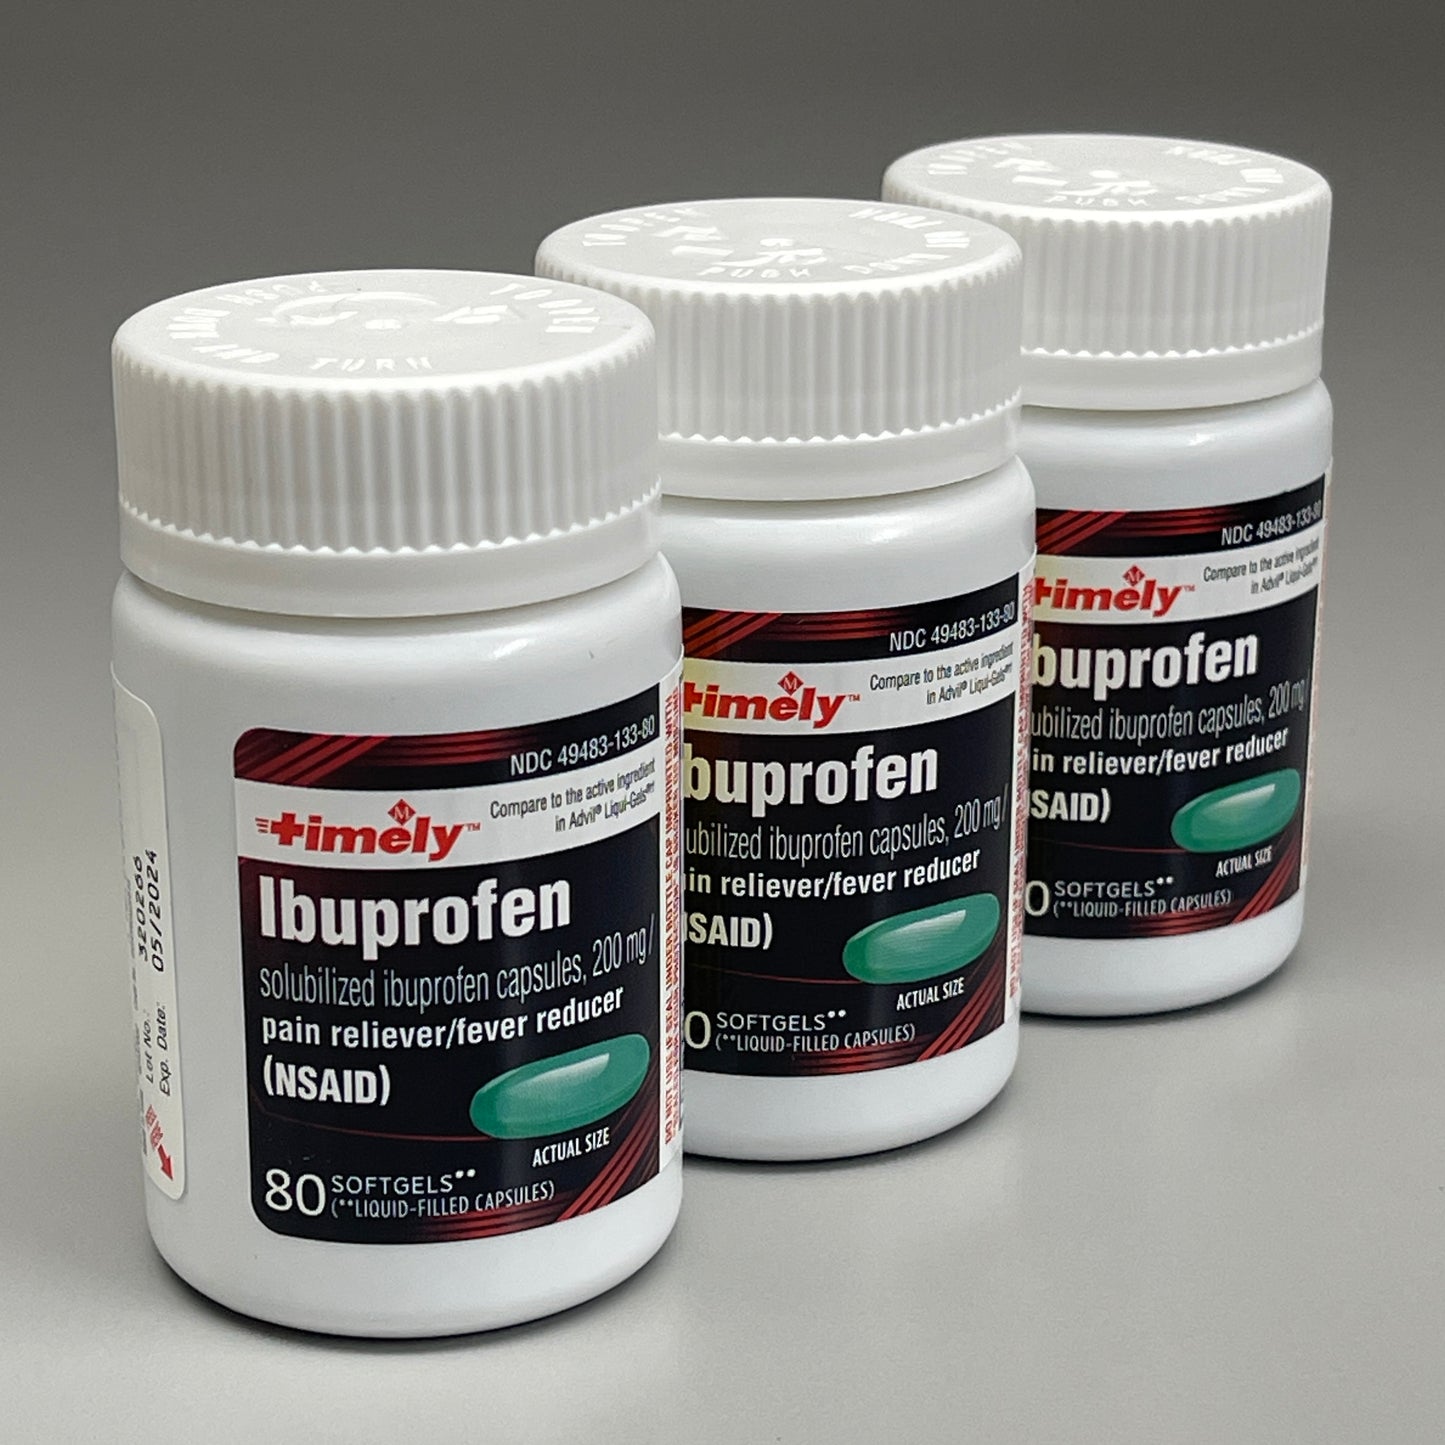 TIMELY Ibuprofen 3-PACK! 80 Softgels 200mg Pain Reliever/Fever Reducer BB 05/24 (New)